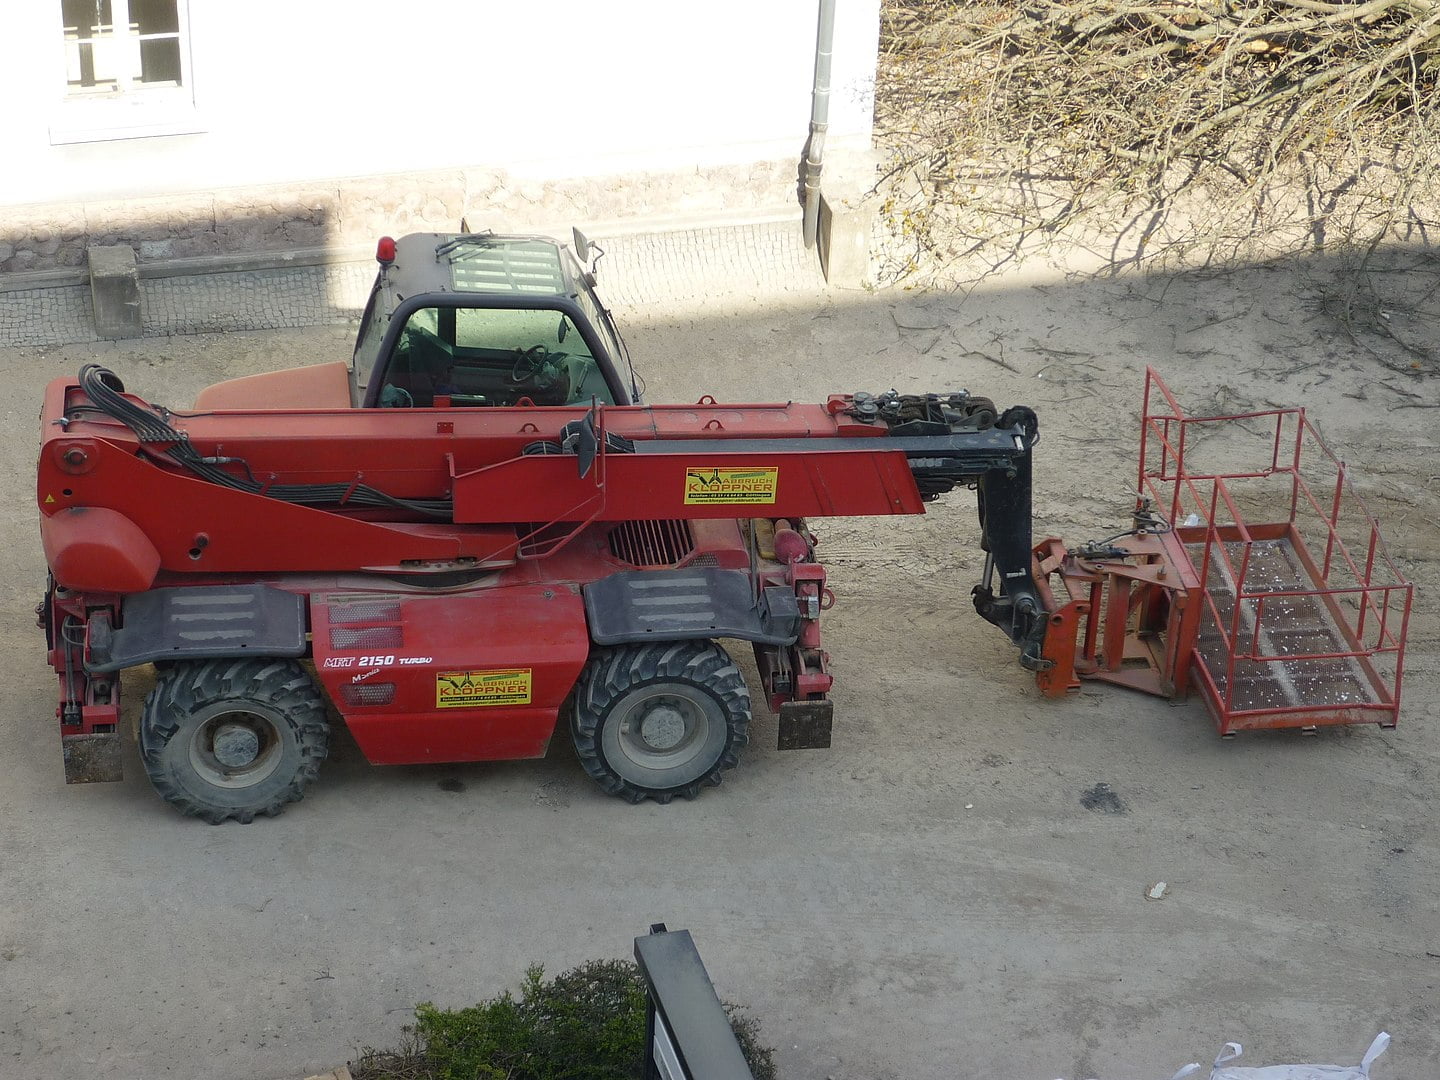 Groupe Manitou Supprime 63 Postes France